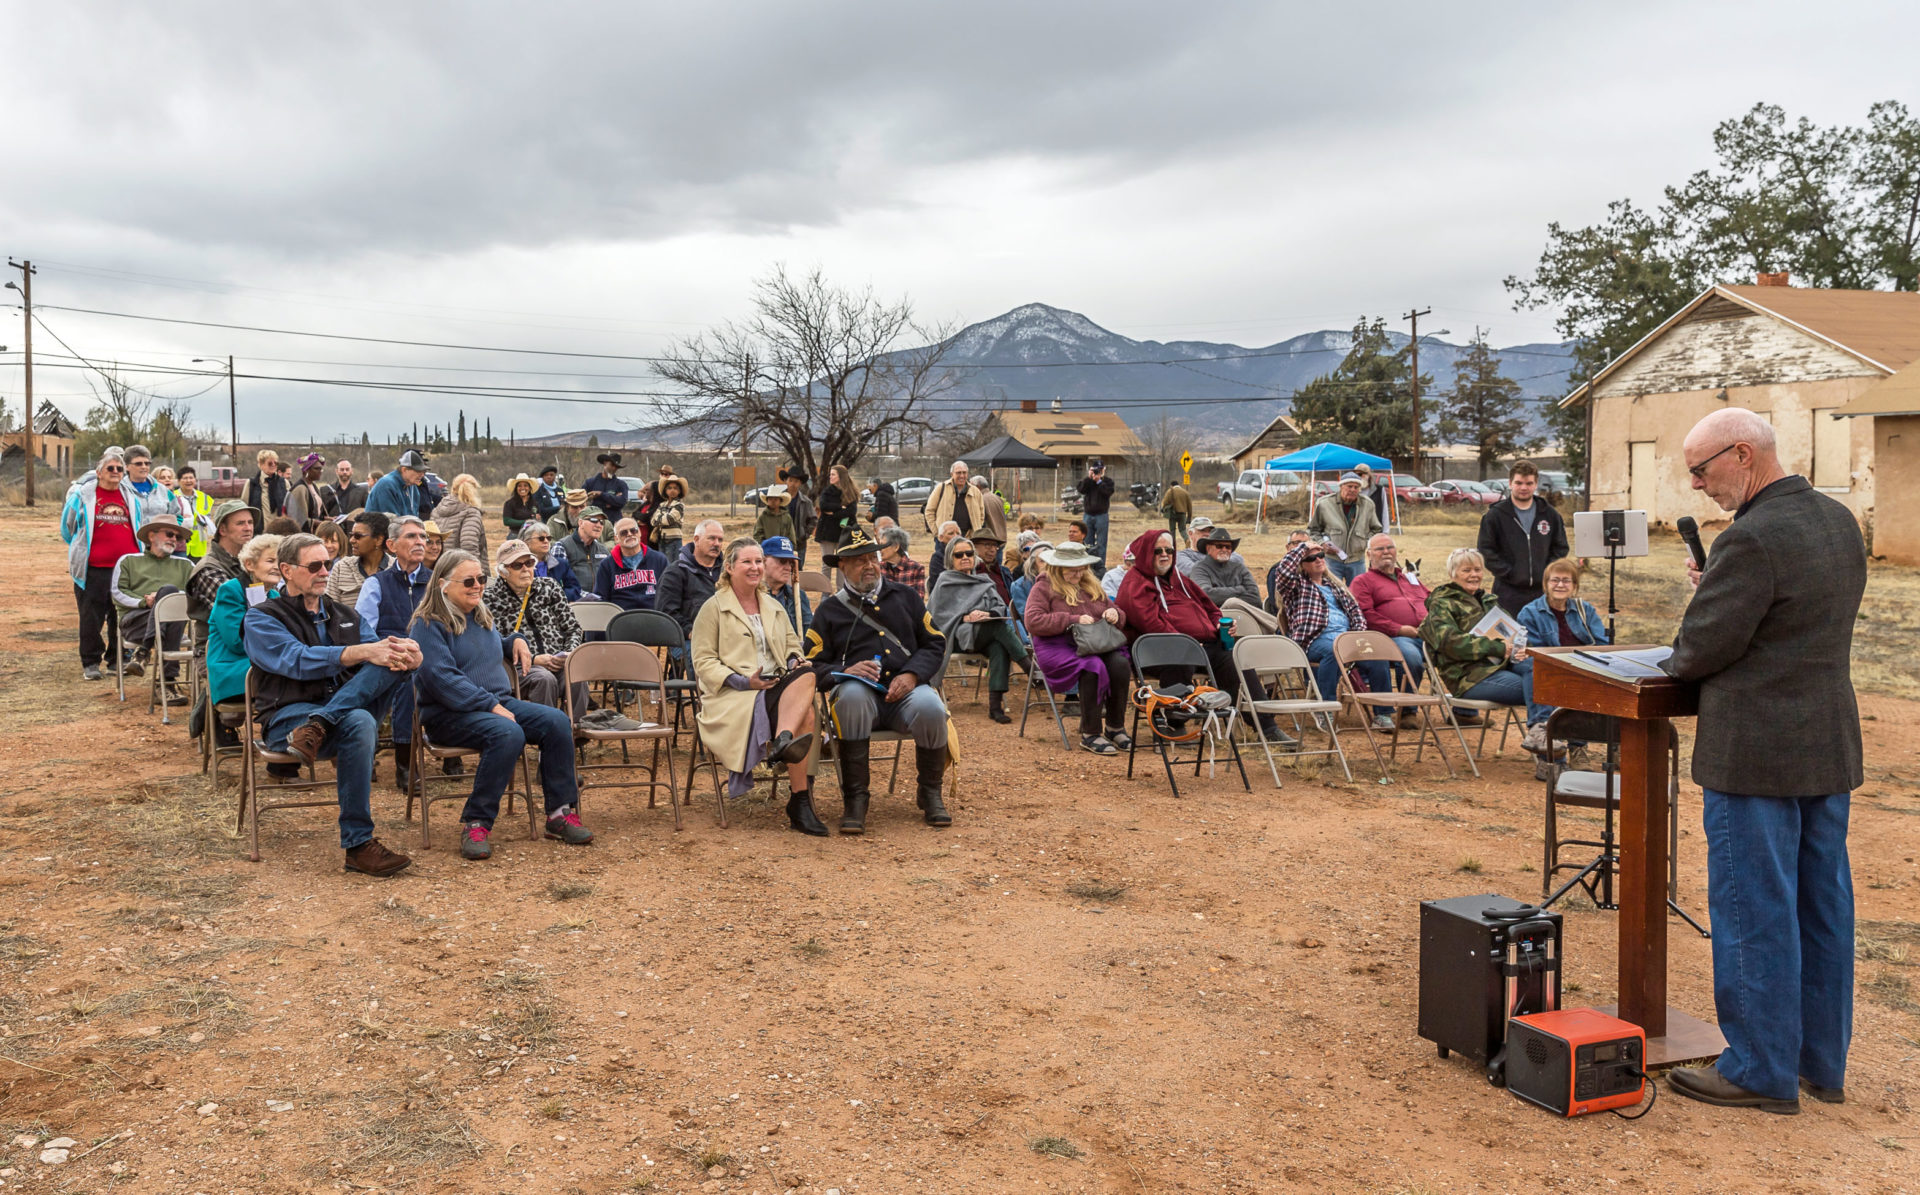 Brooks Jeffery, Naco Heritage Alliance, welcomes visitors to the Camp Naco Open House celebrating Black History Month and major grant funding that will restore adobe buildings and ensure the future of Camp Naco. Image: Stephen Pauken, Bisbee City Manager